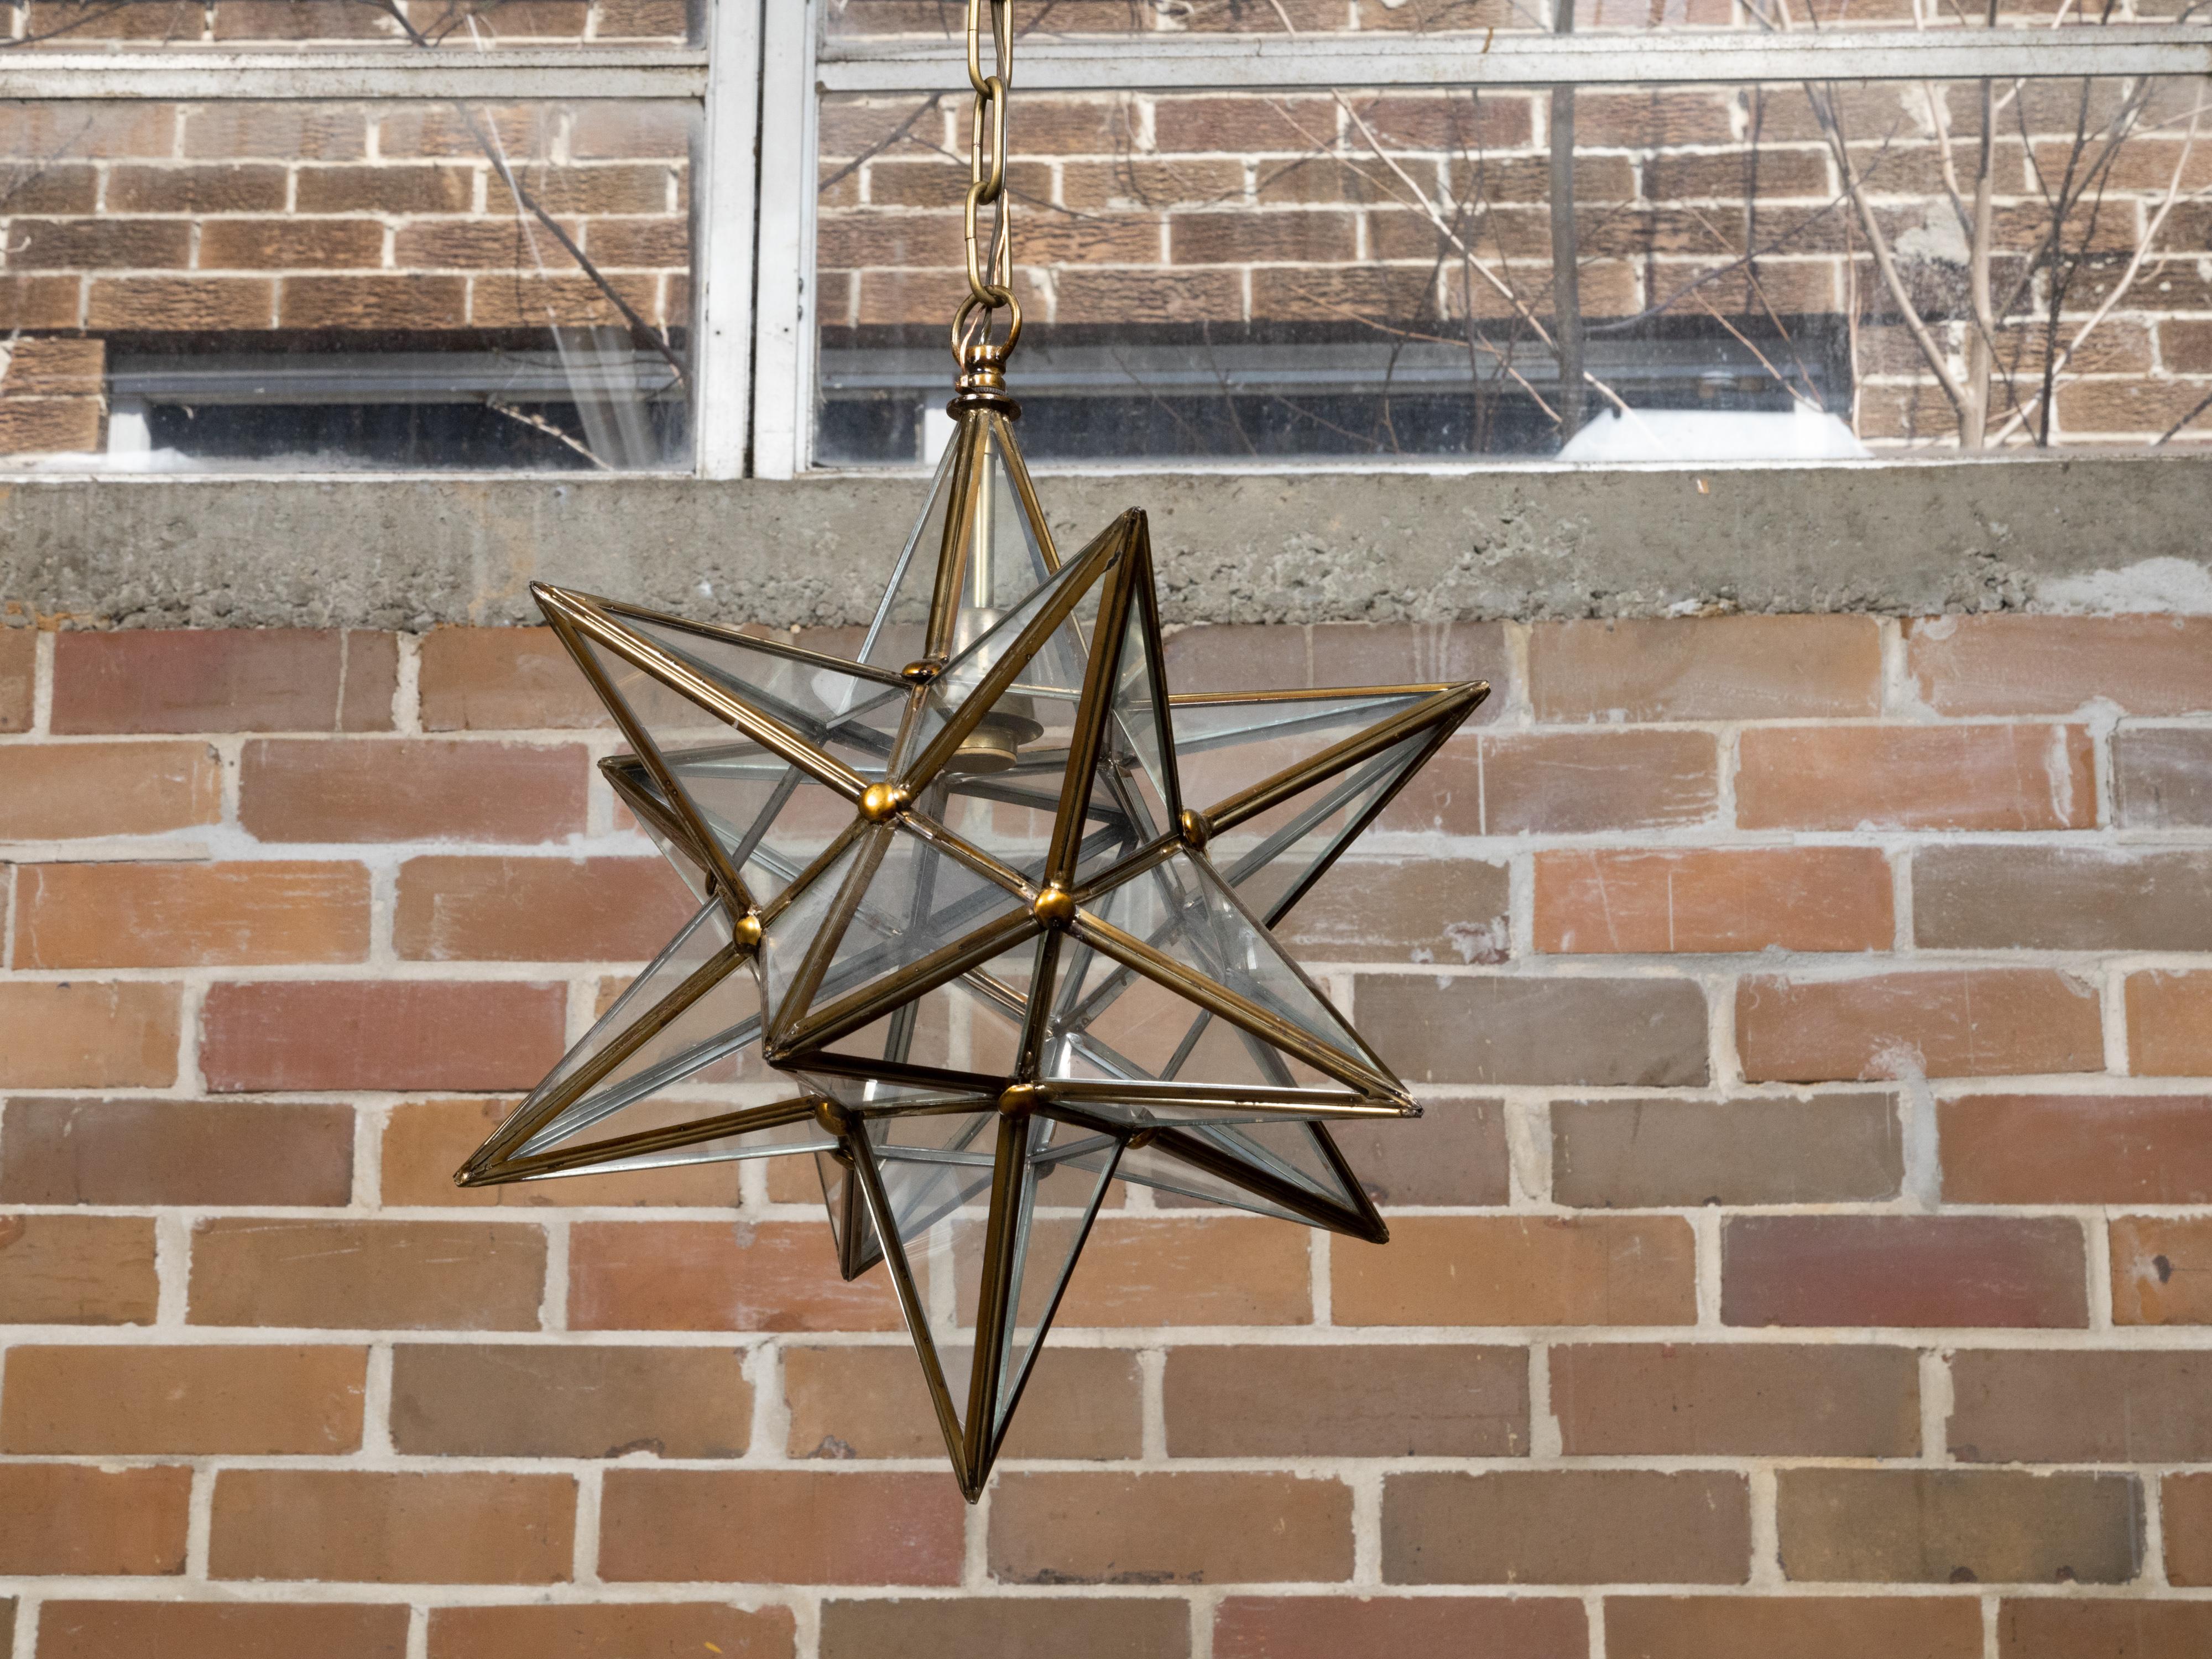 A French Midcentury star light fixture with glass panels surrounding a central socket, rewired for the USA. This French Midcentury star light fixture epitomizes the elegance and geometric allure of the era. Constructed from a durable metal